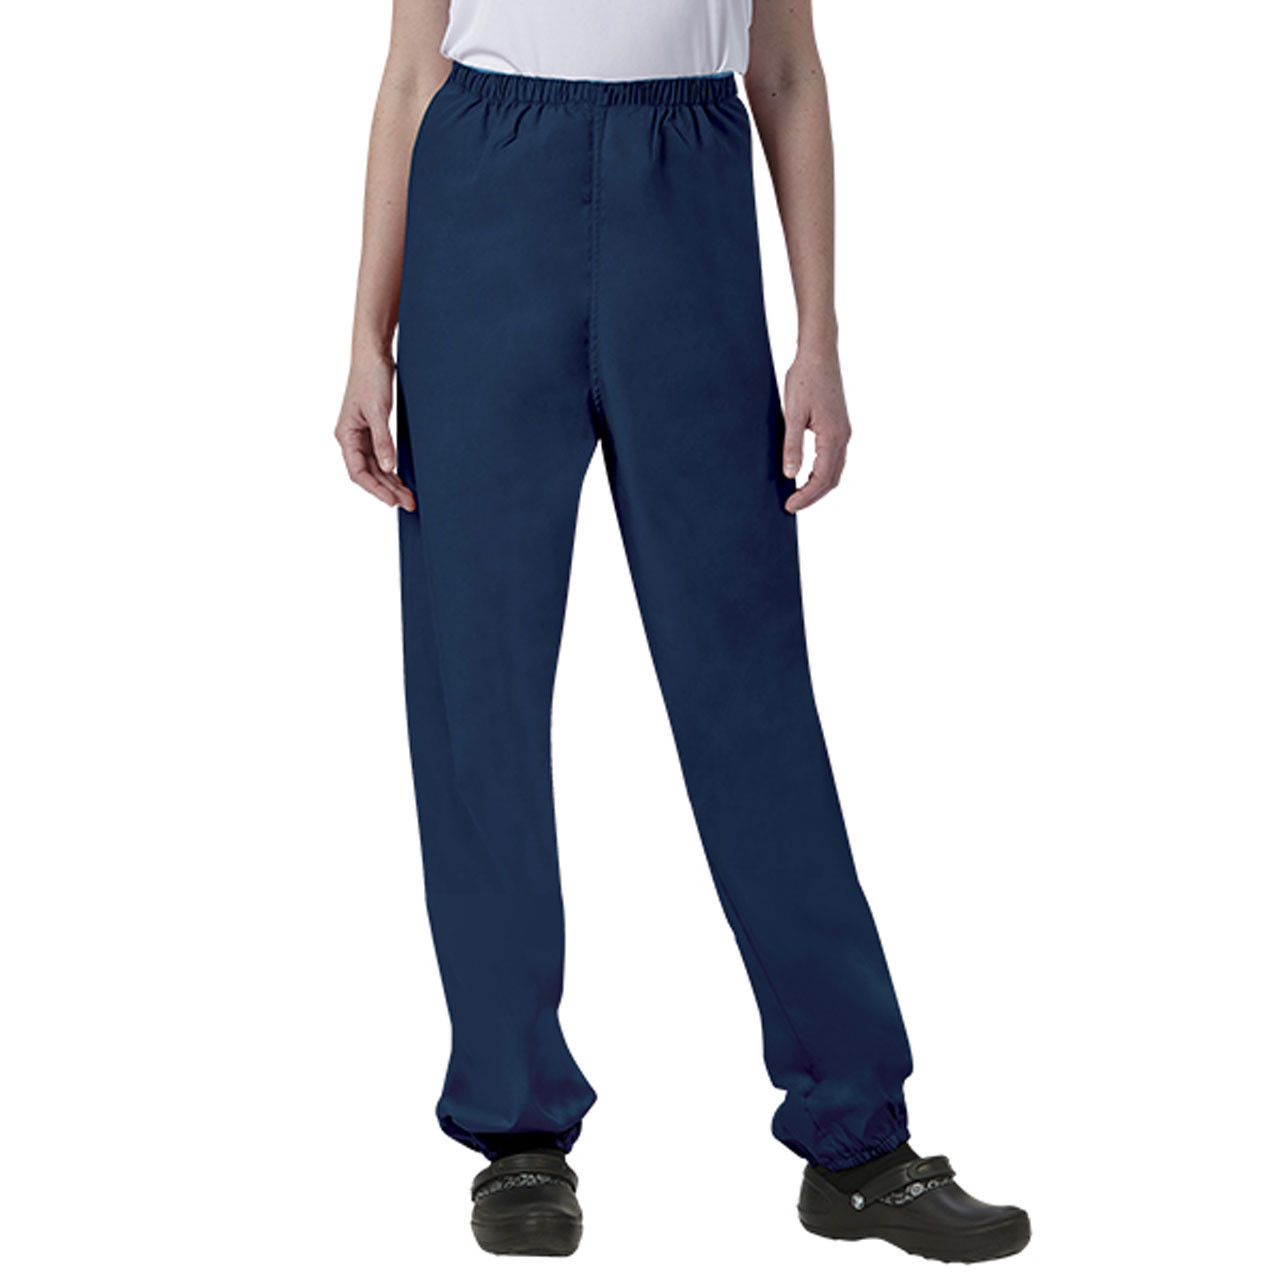 Can these cotton scrub pants be worn under any coat or garment?